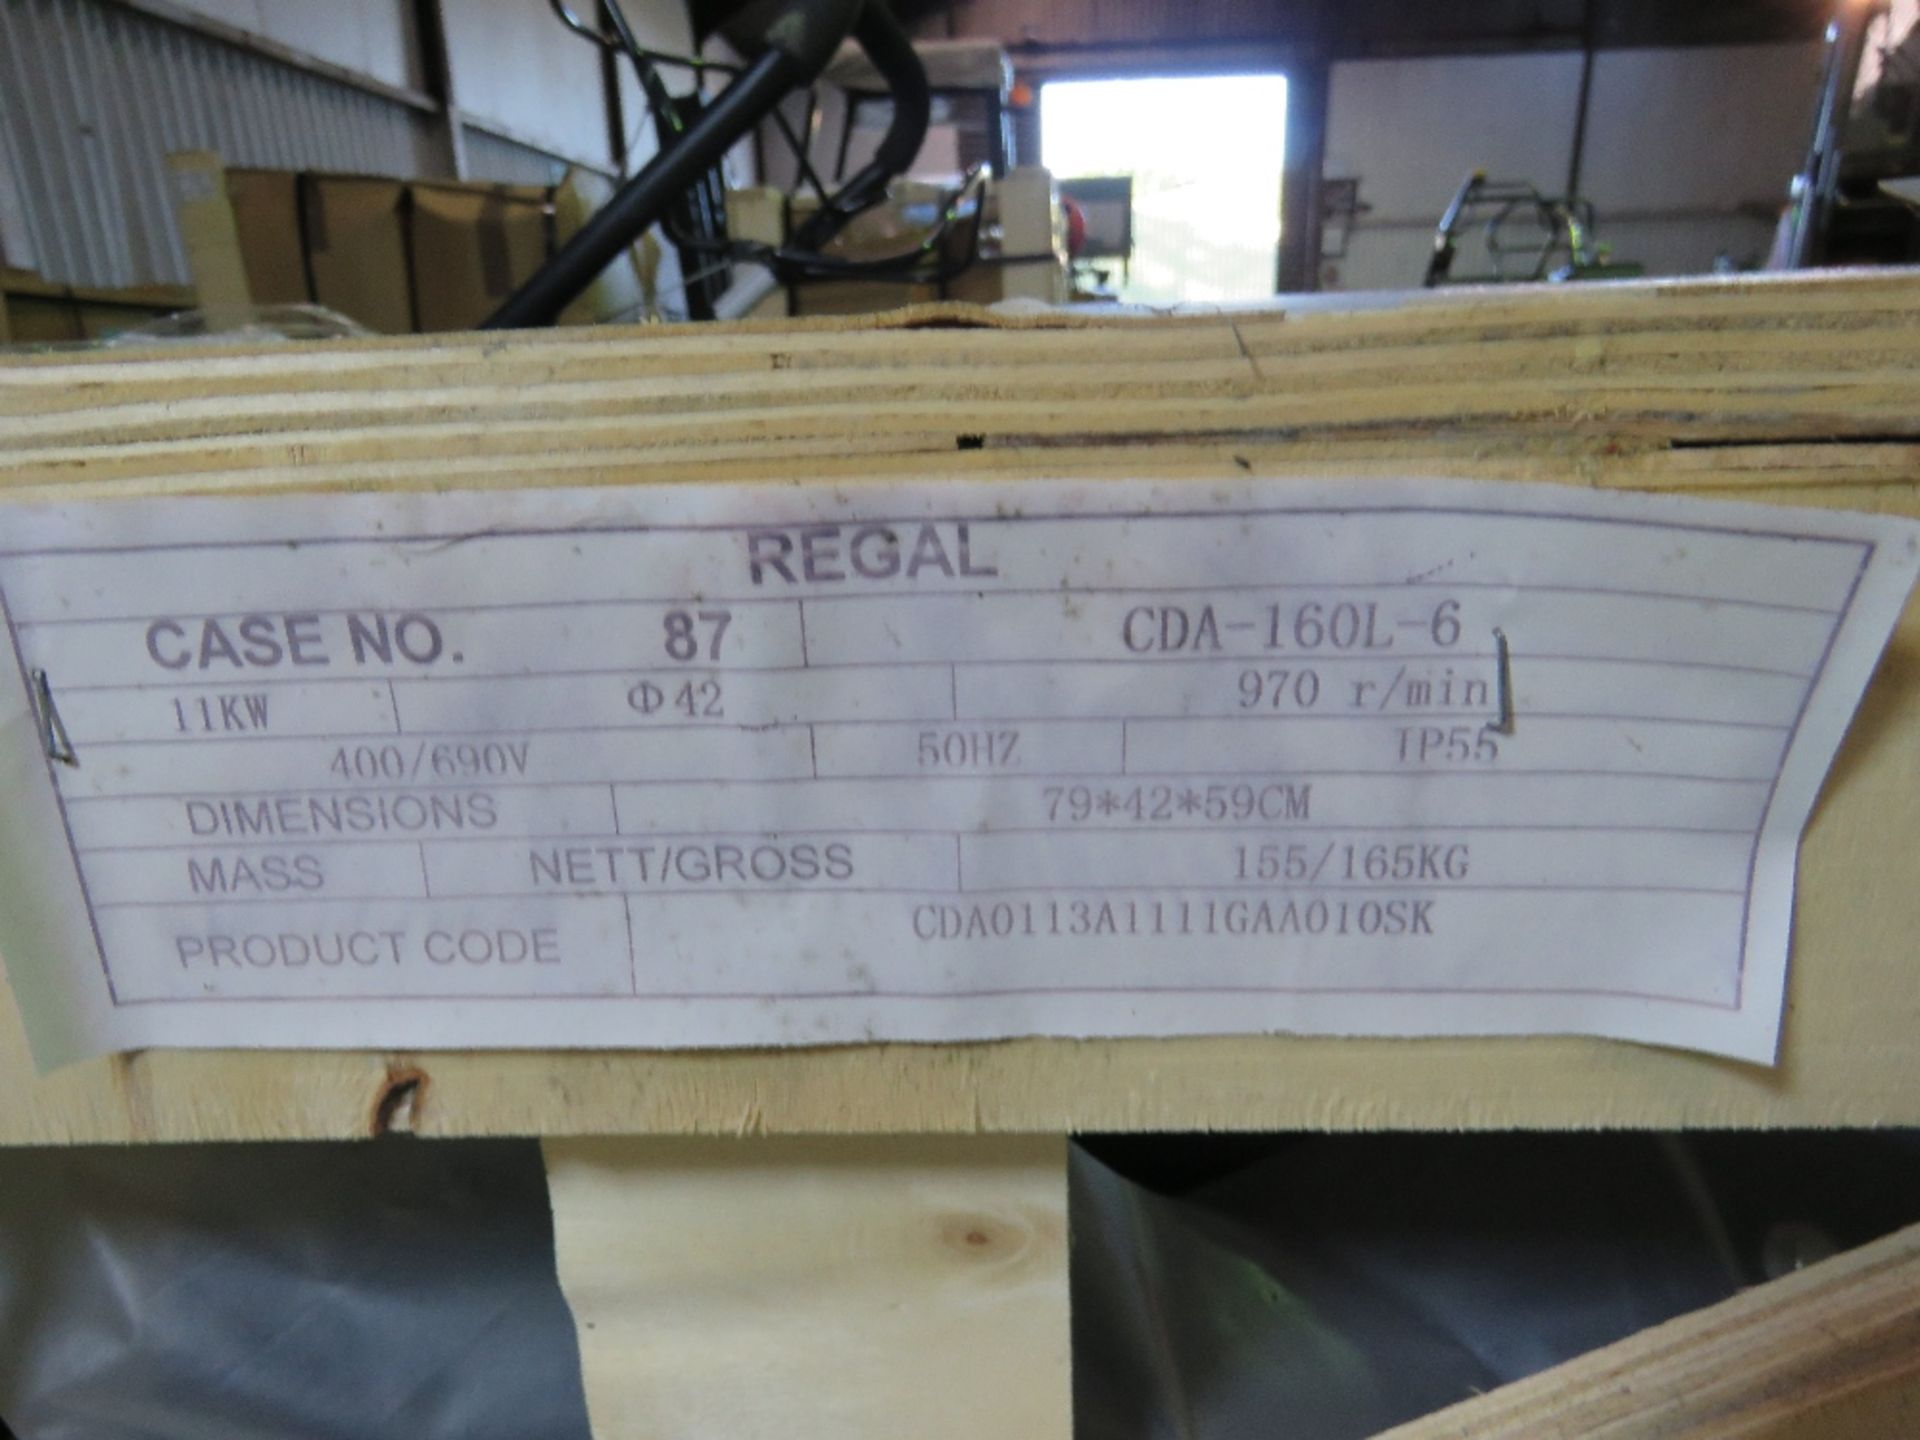 PALLET CONTAINING 1 X 11KW ELECTRIC MOTORPLUS FLANGES. . SOURCED FROM A LARGE MANUFACTURING COMPANY - Image 4 of 4